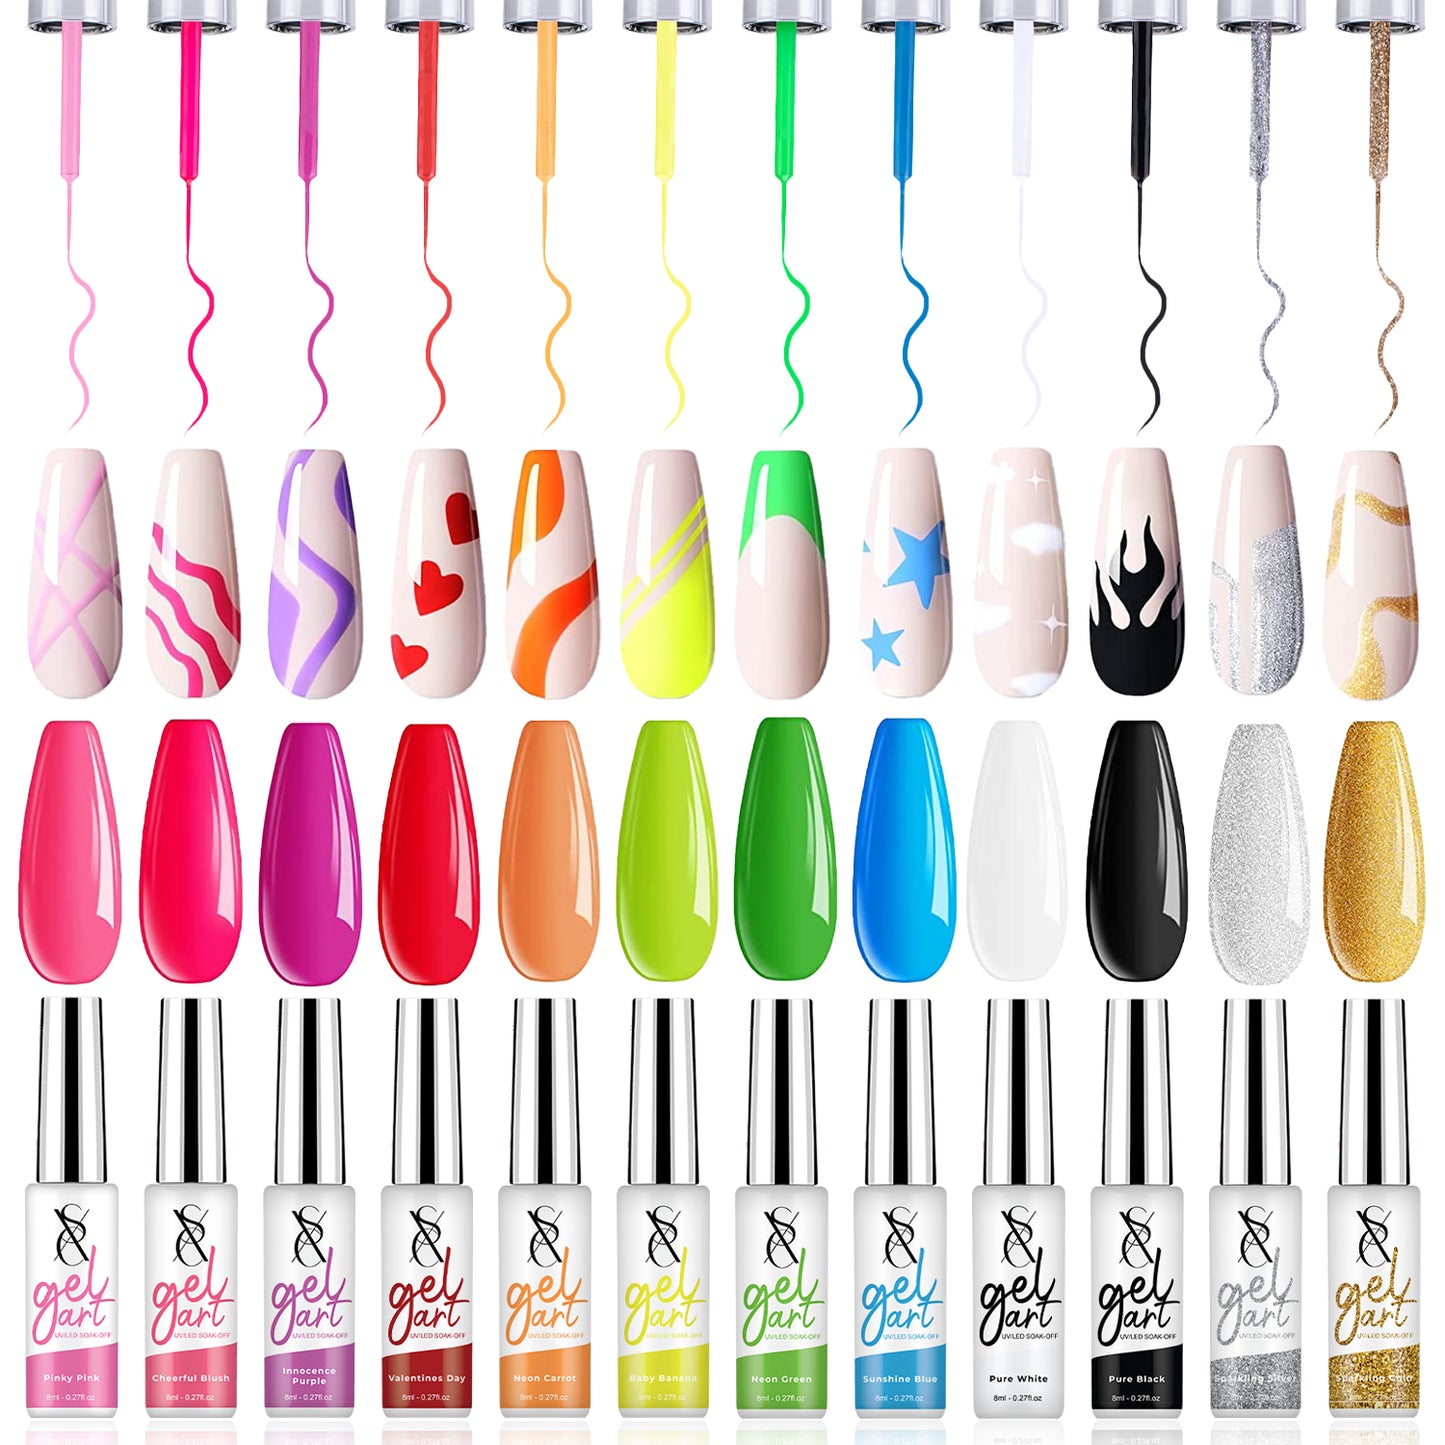 SXC Cosmetics Nail Art Dream Liners Series of 12 Colors